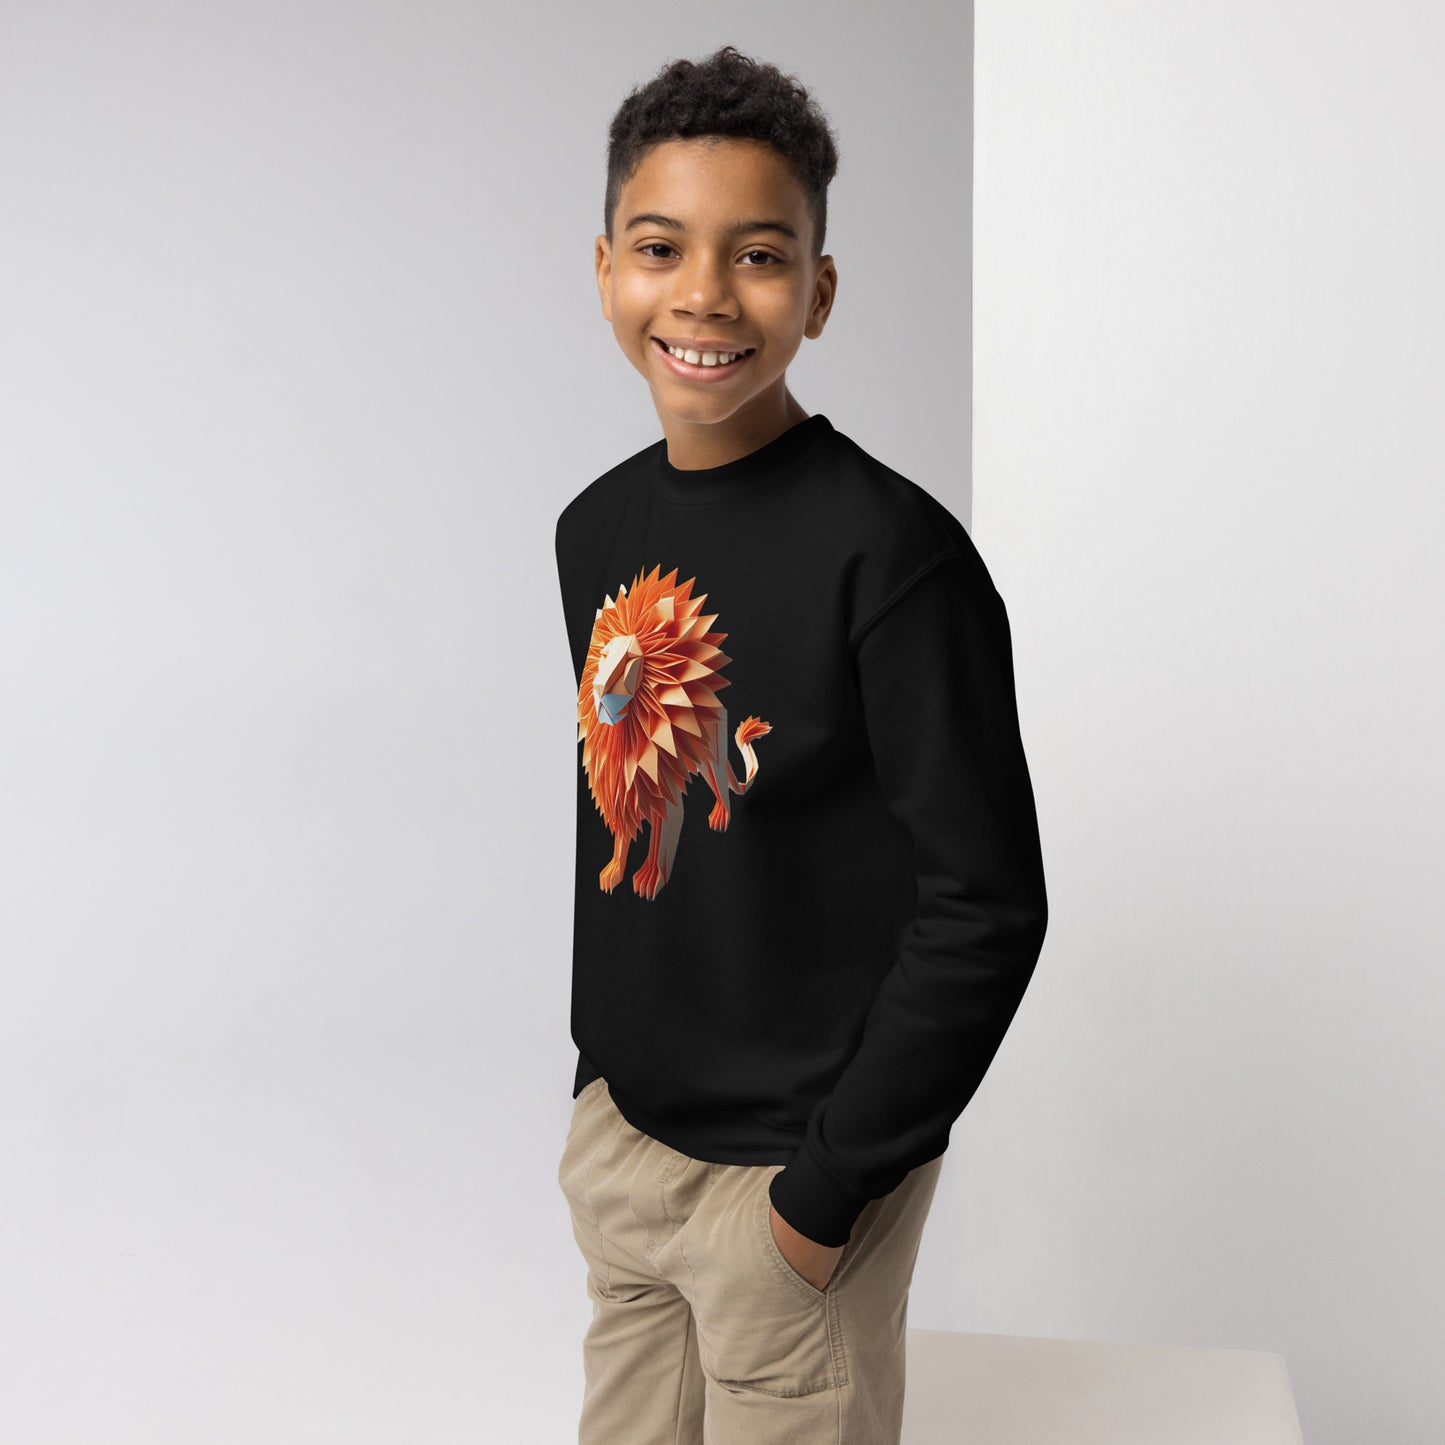 Youth with black Sweater with print of a lion